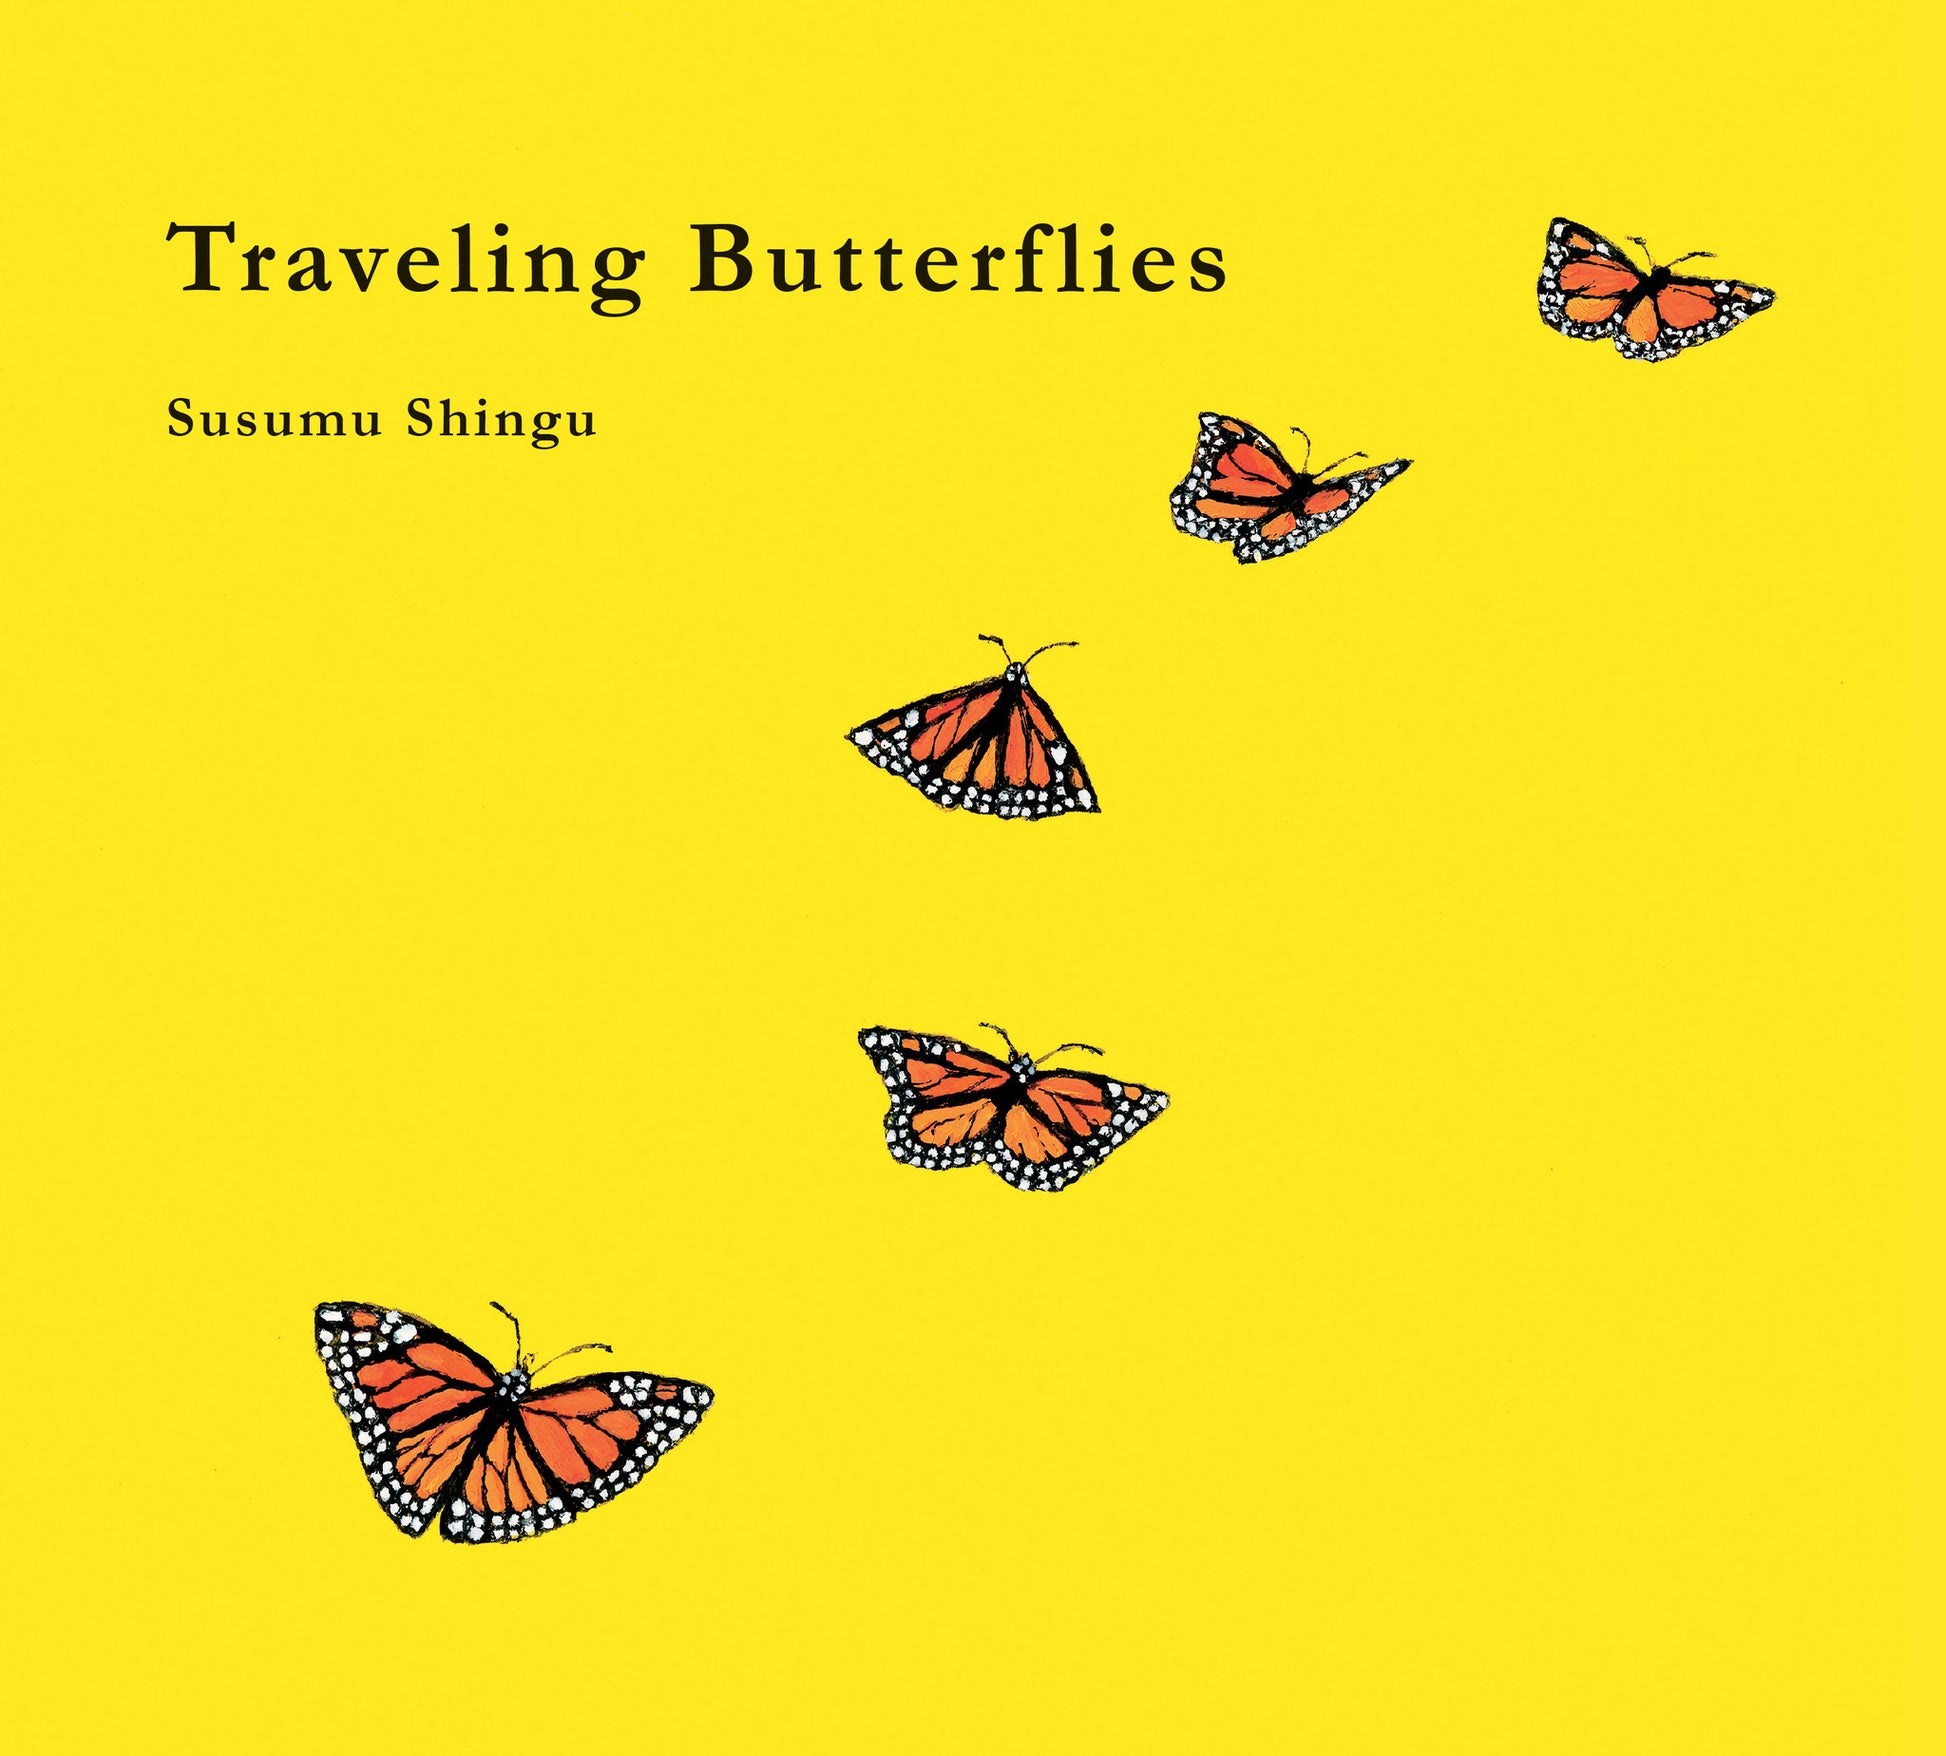 Traveling Butterflies - Owlkids - Reading for kids and literacy resources for parents made fun. Books helping kids to learn.